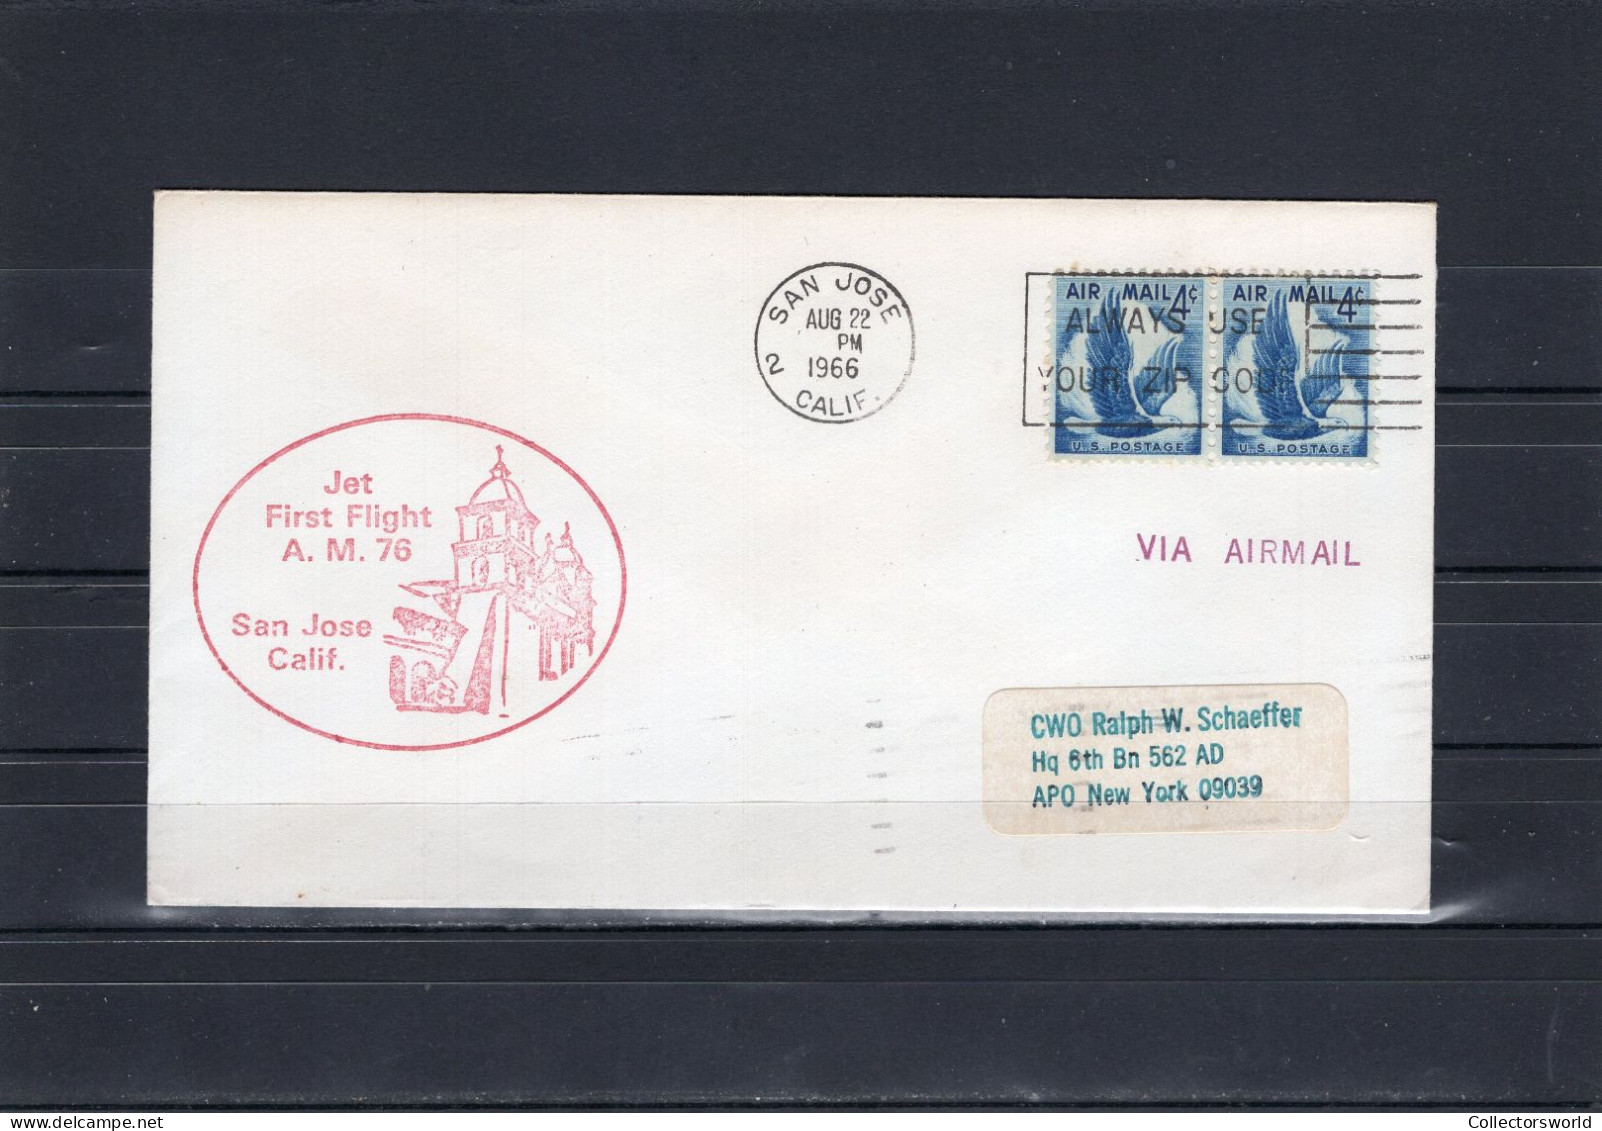 USA 1966 First Flight Cover Jet First Flight AM76 San Francisco - Los Angeles - Red Ink - Schmuck-FDC